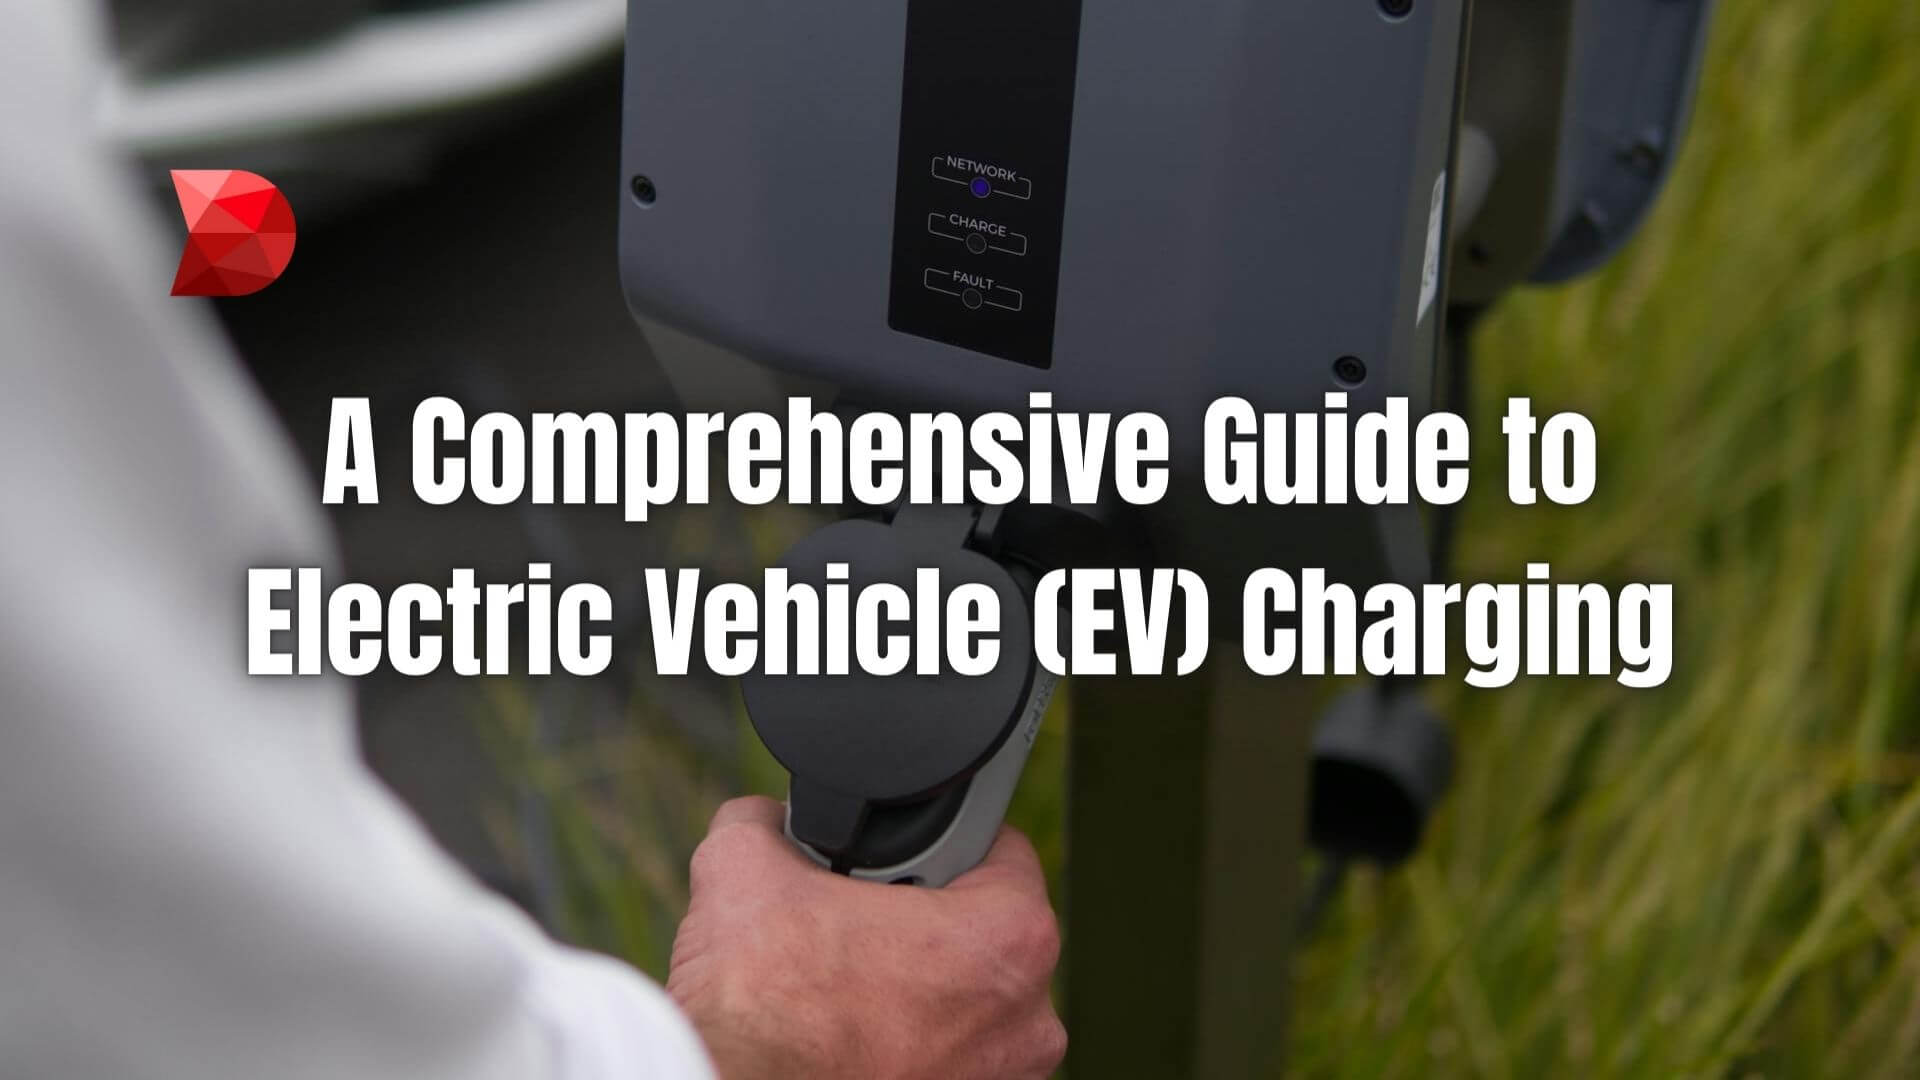 Plug into the future of mobility with our full electric vehicle charging guide. Learn how to charge smarter, faster, and more conveniently.